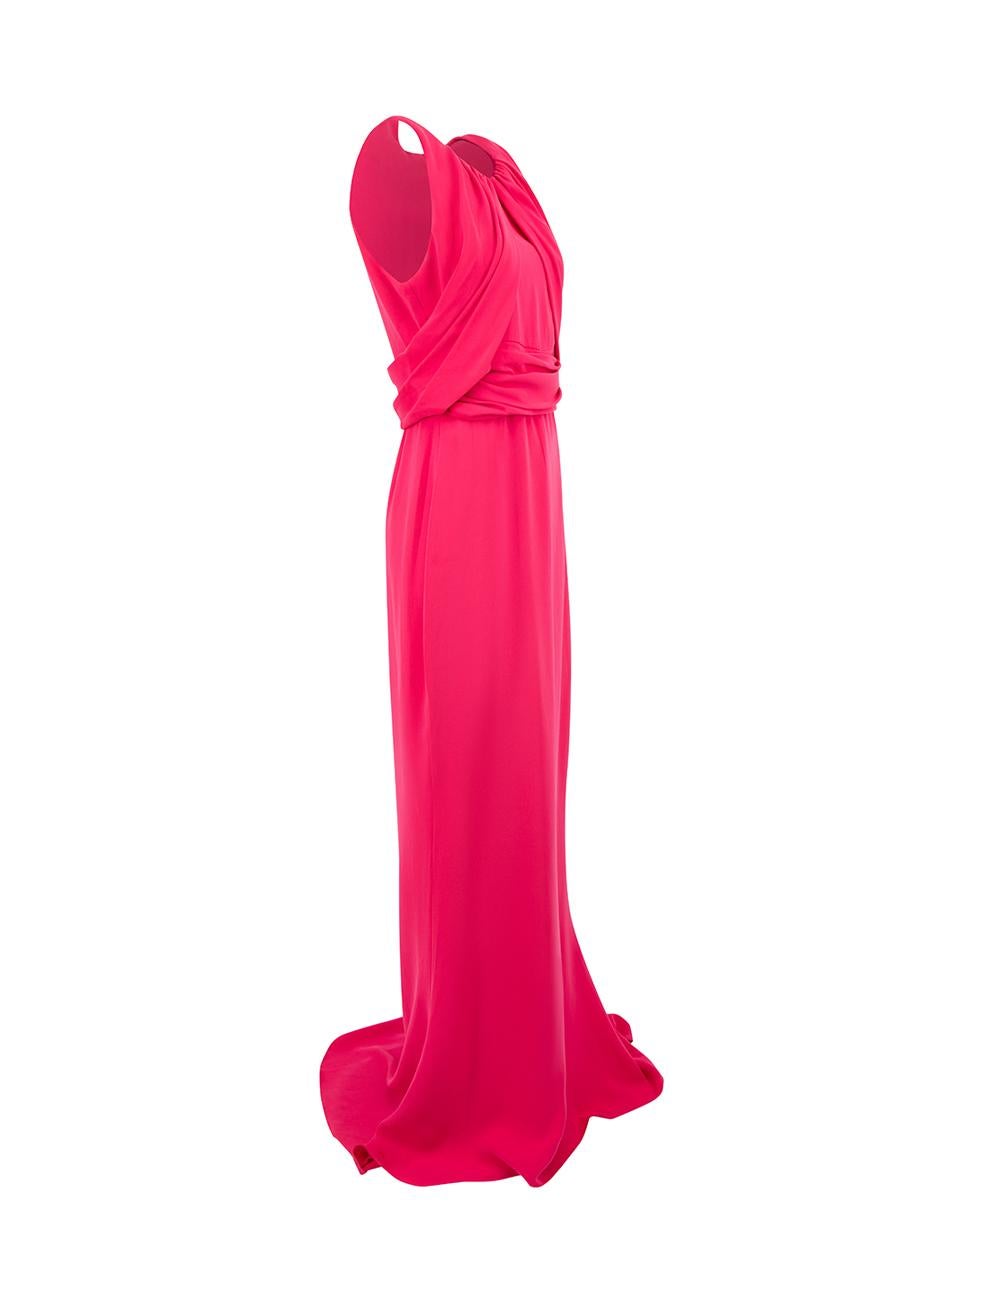 CONDITION is Very good. Minimal wear to dress is evident. Minimal wear to fabric surface with one or two very small discoloured marks found at the hem on this used Max Mara Pianoforte designer resale item.

Details
Pink
Synthetic
Maxi gown
Draped